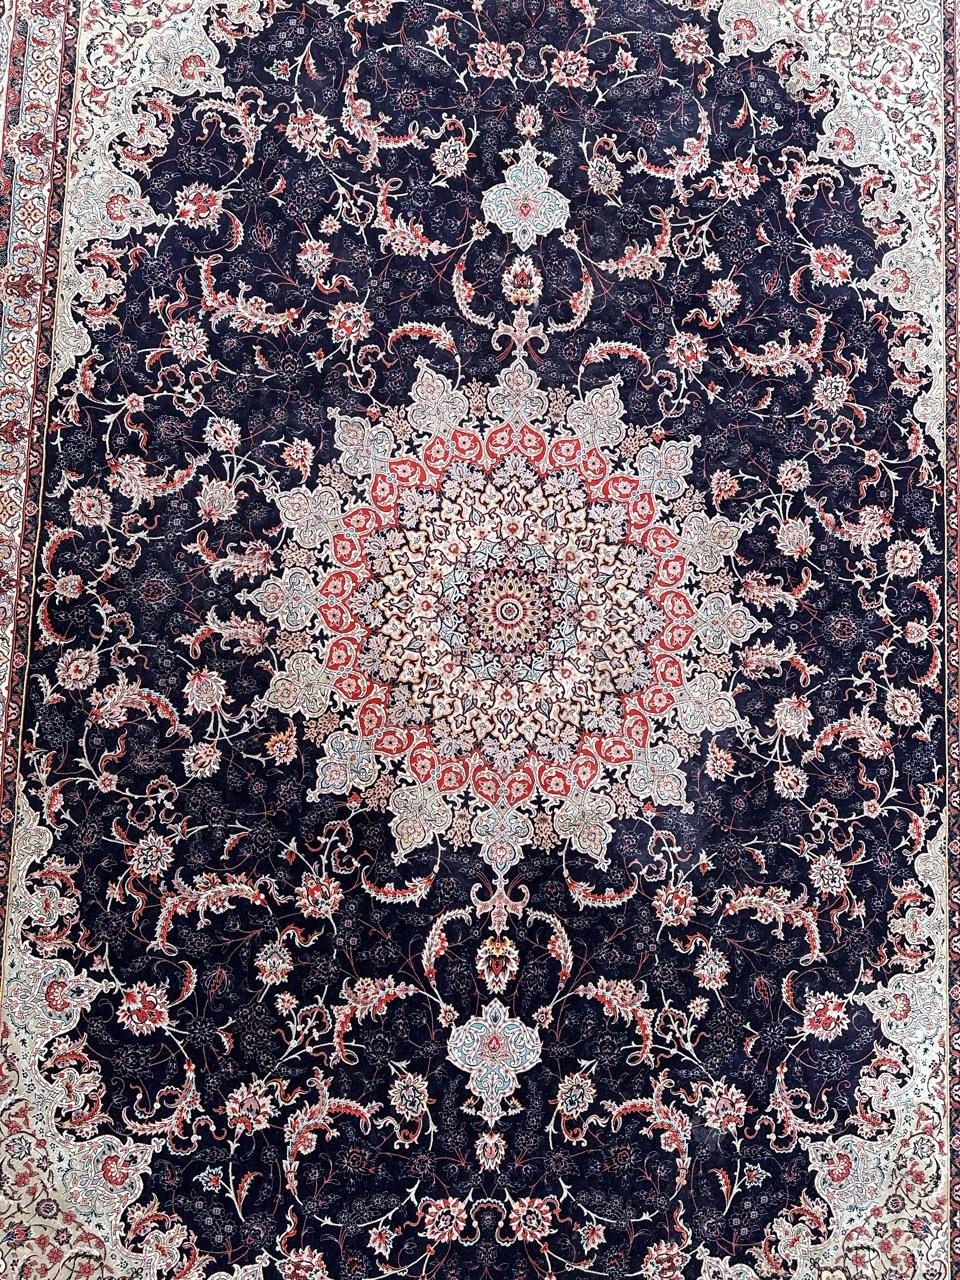 Very beautiful large Tabriz design rug with beautiful floral design and nice colours, made with mechanical methods with wool.

✨✨✨
